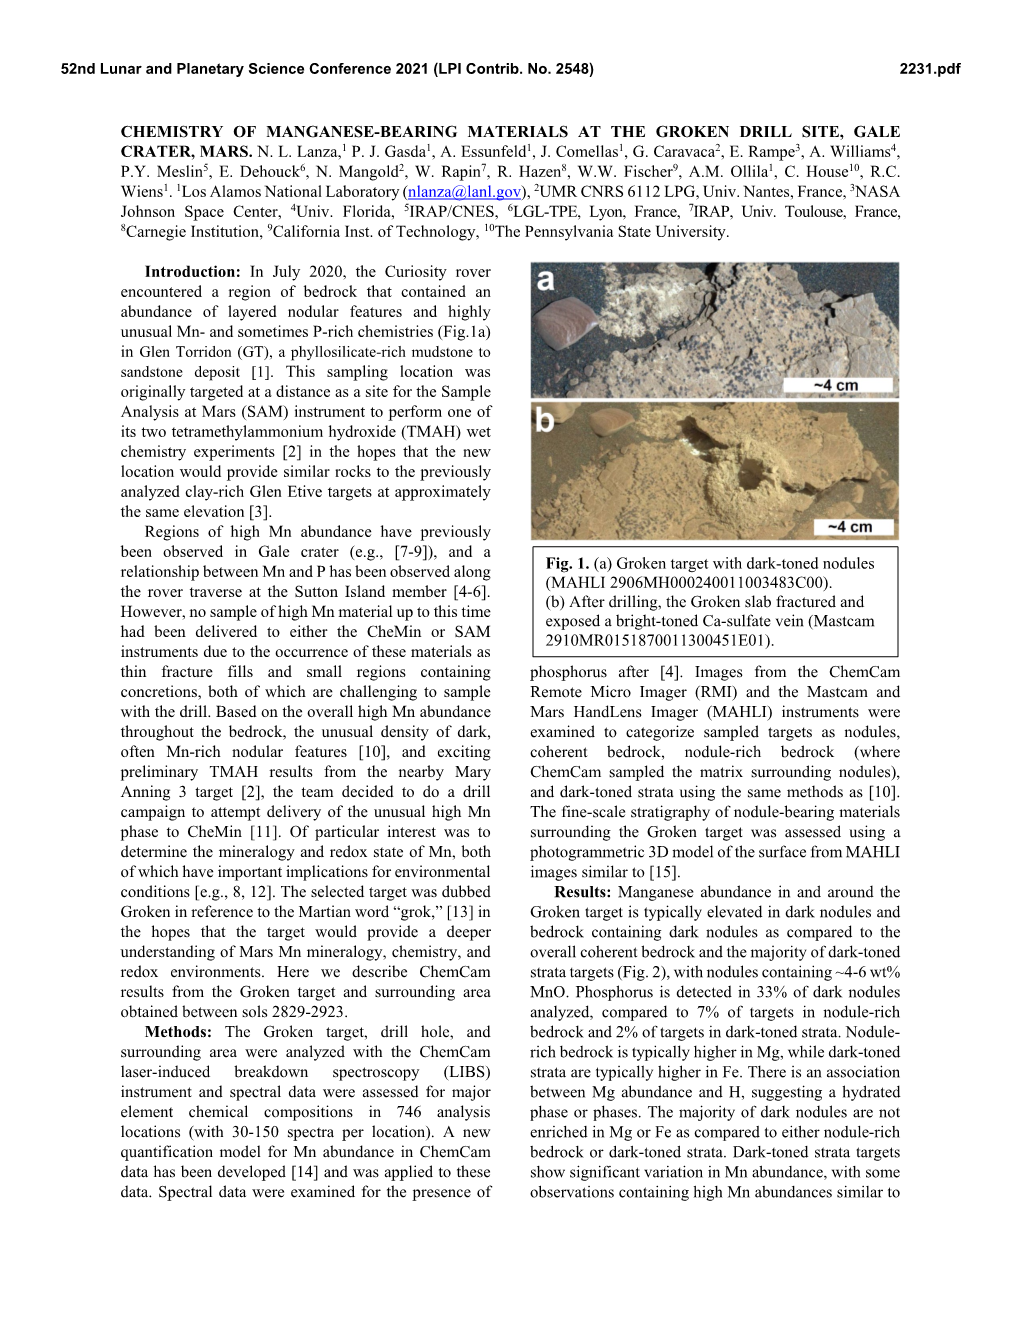 Chemistry of Manganese-Bearing Materials at the Groken Drill Site, Gale Crater, Mars